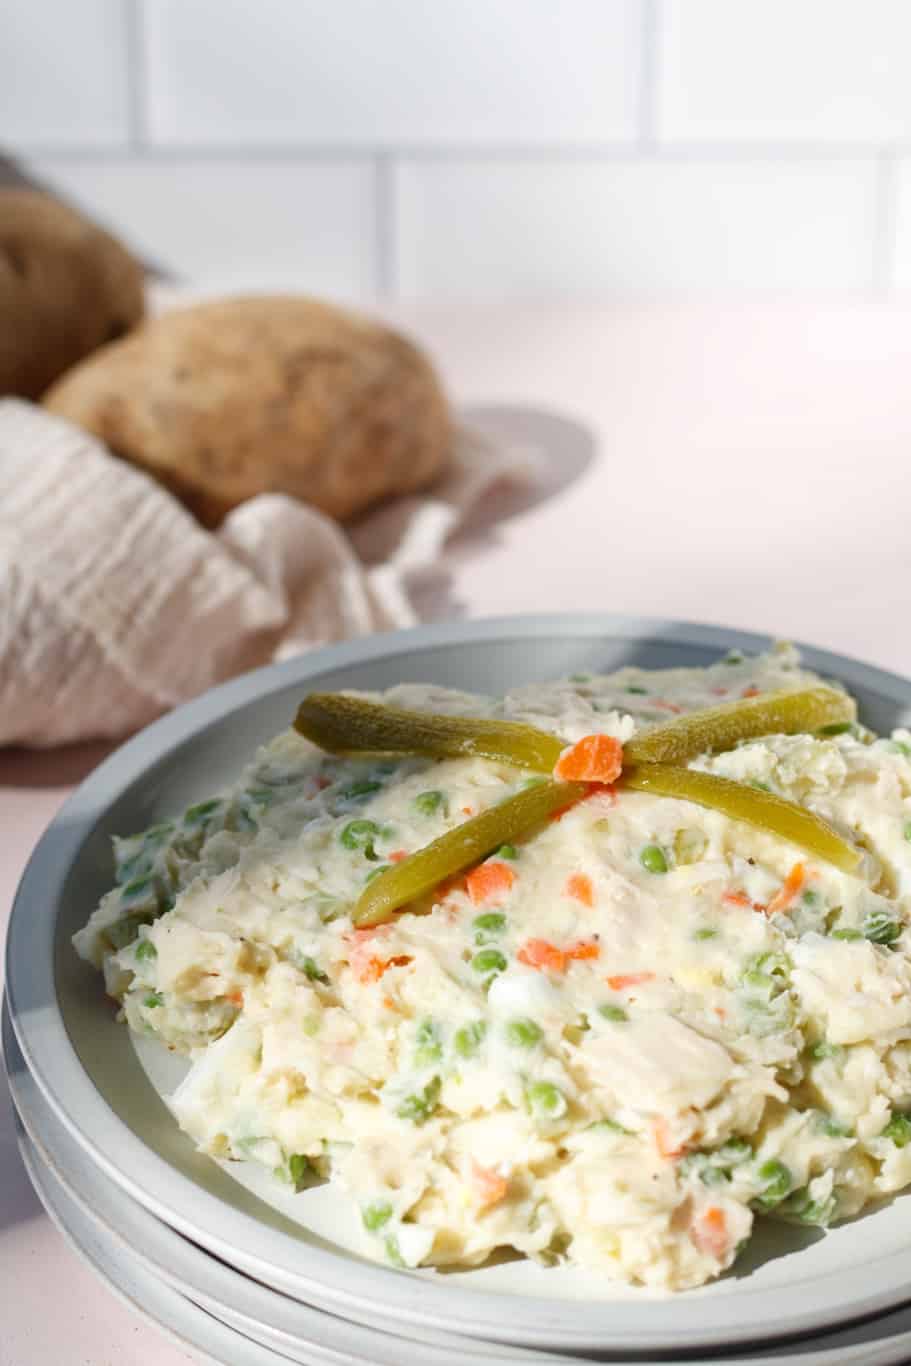 A plate of creamy tangy salad olivieh made up of cooked chicken, potatoes, eggs, and other veggies. It is served with dill pickles on the top.